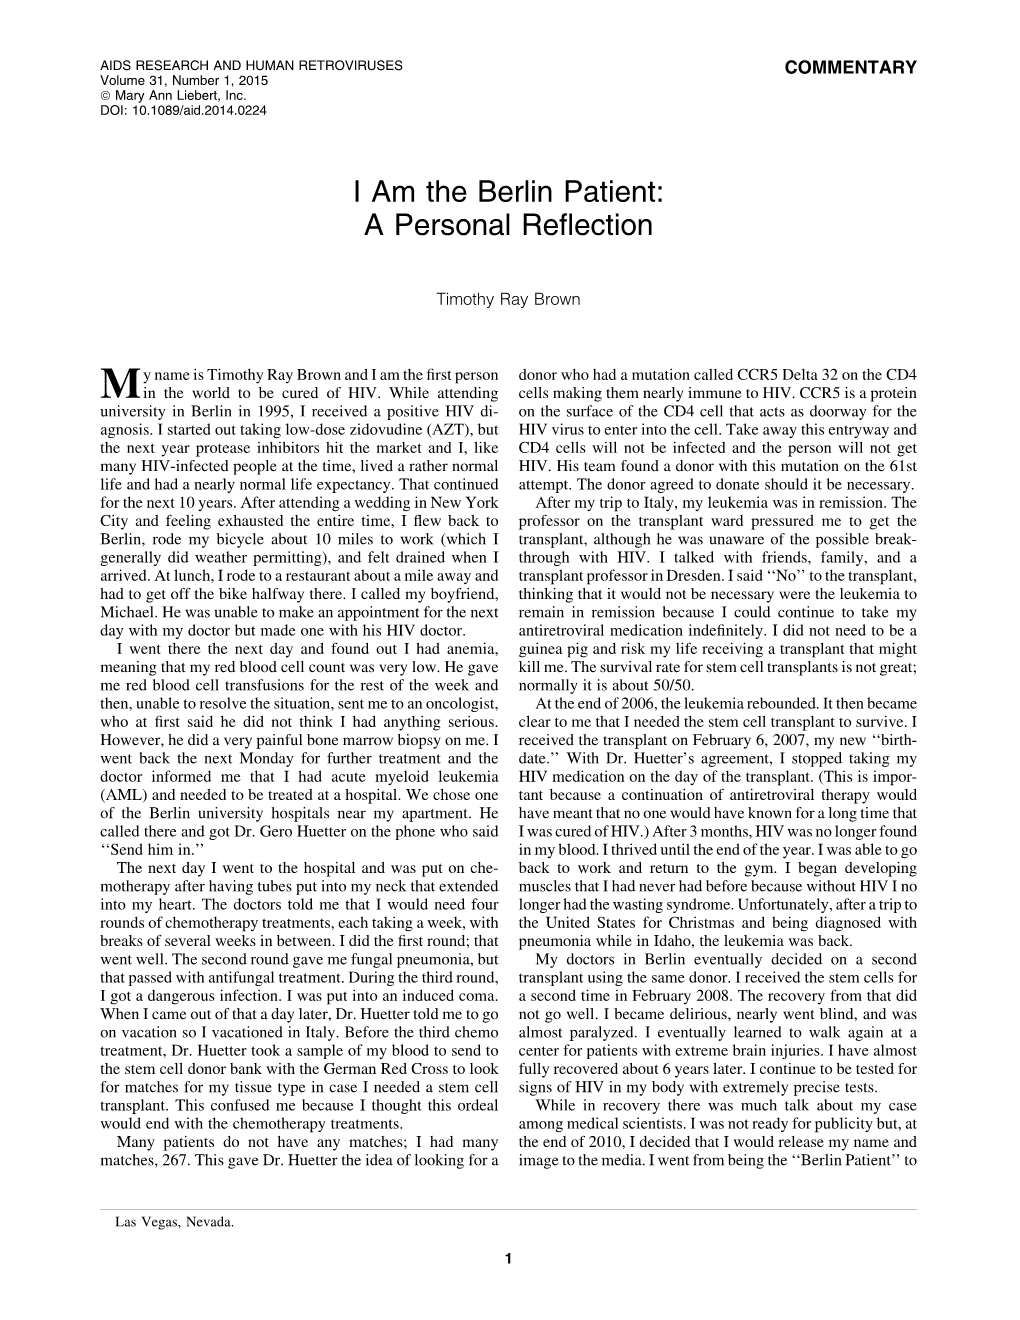 I Am the Berlin Patient: a Personal Reﬂection